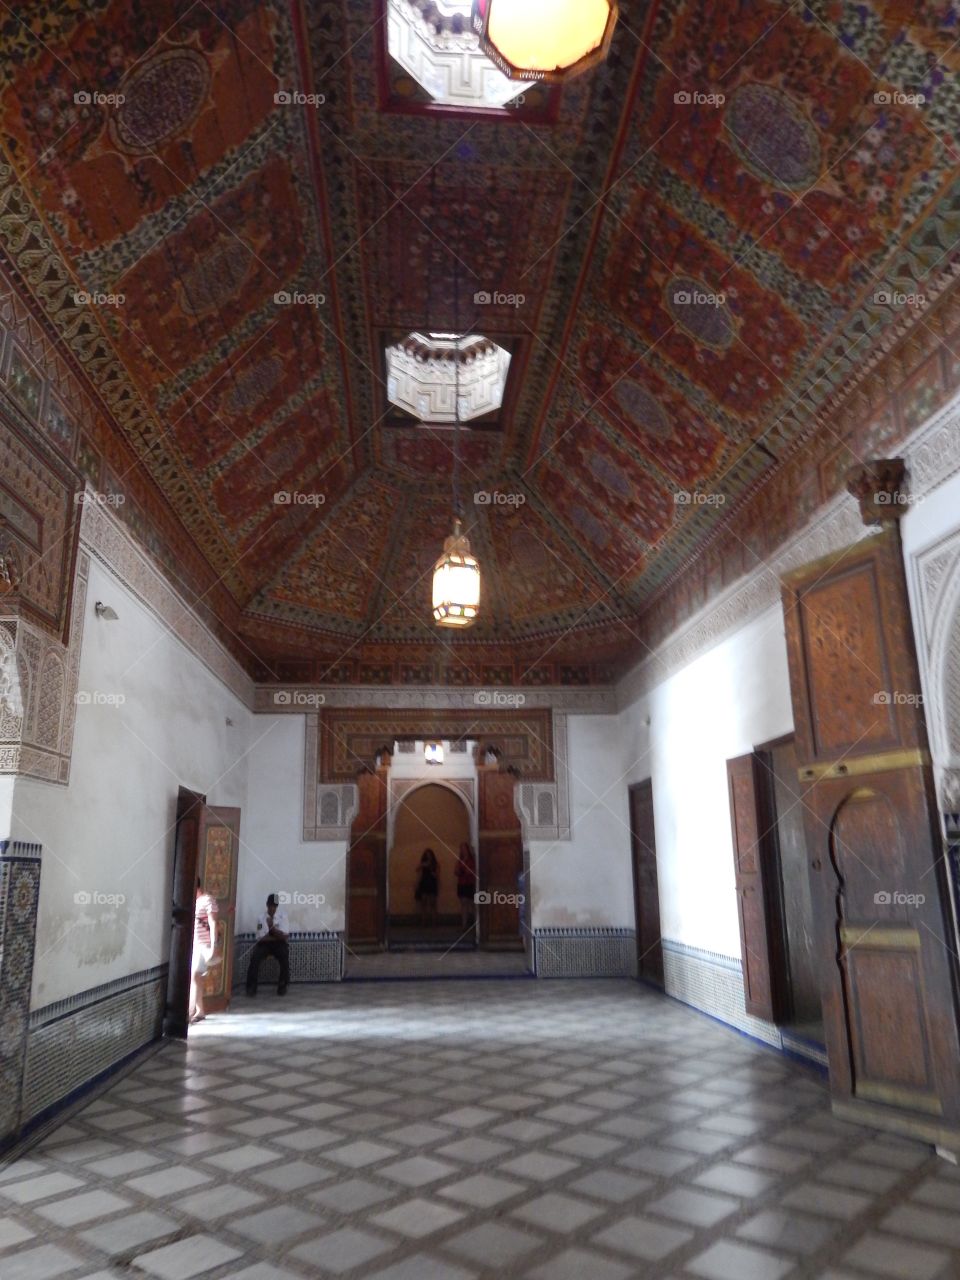 Inside of a palace in Marrakech, Morocco 